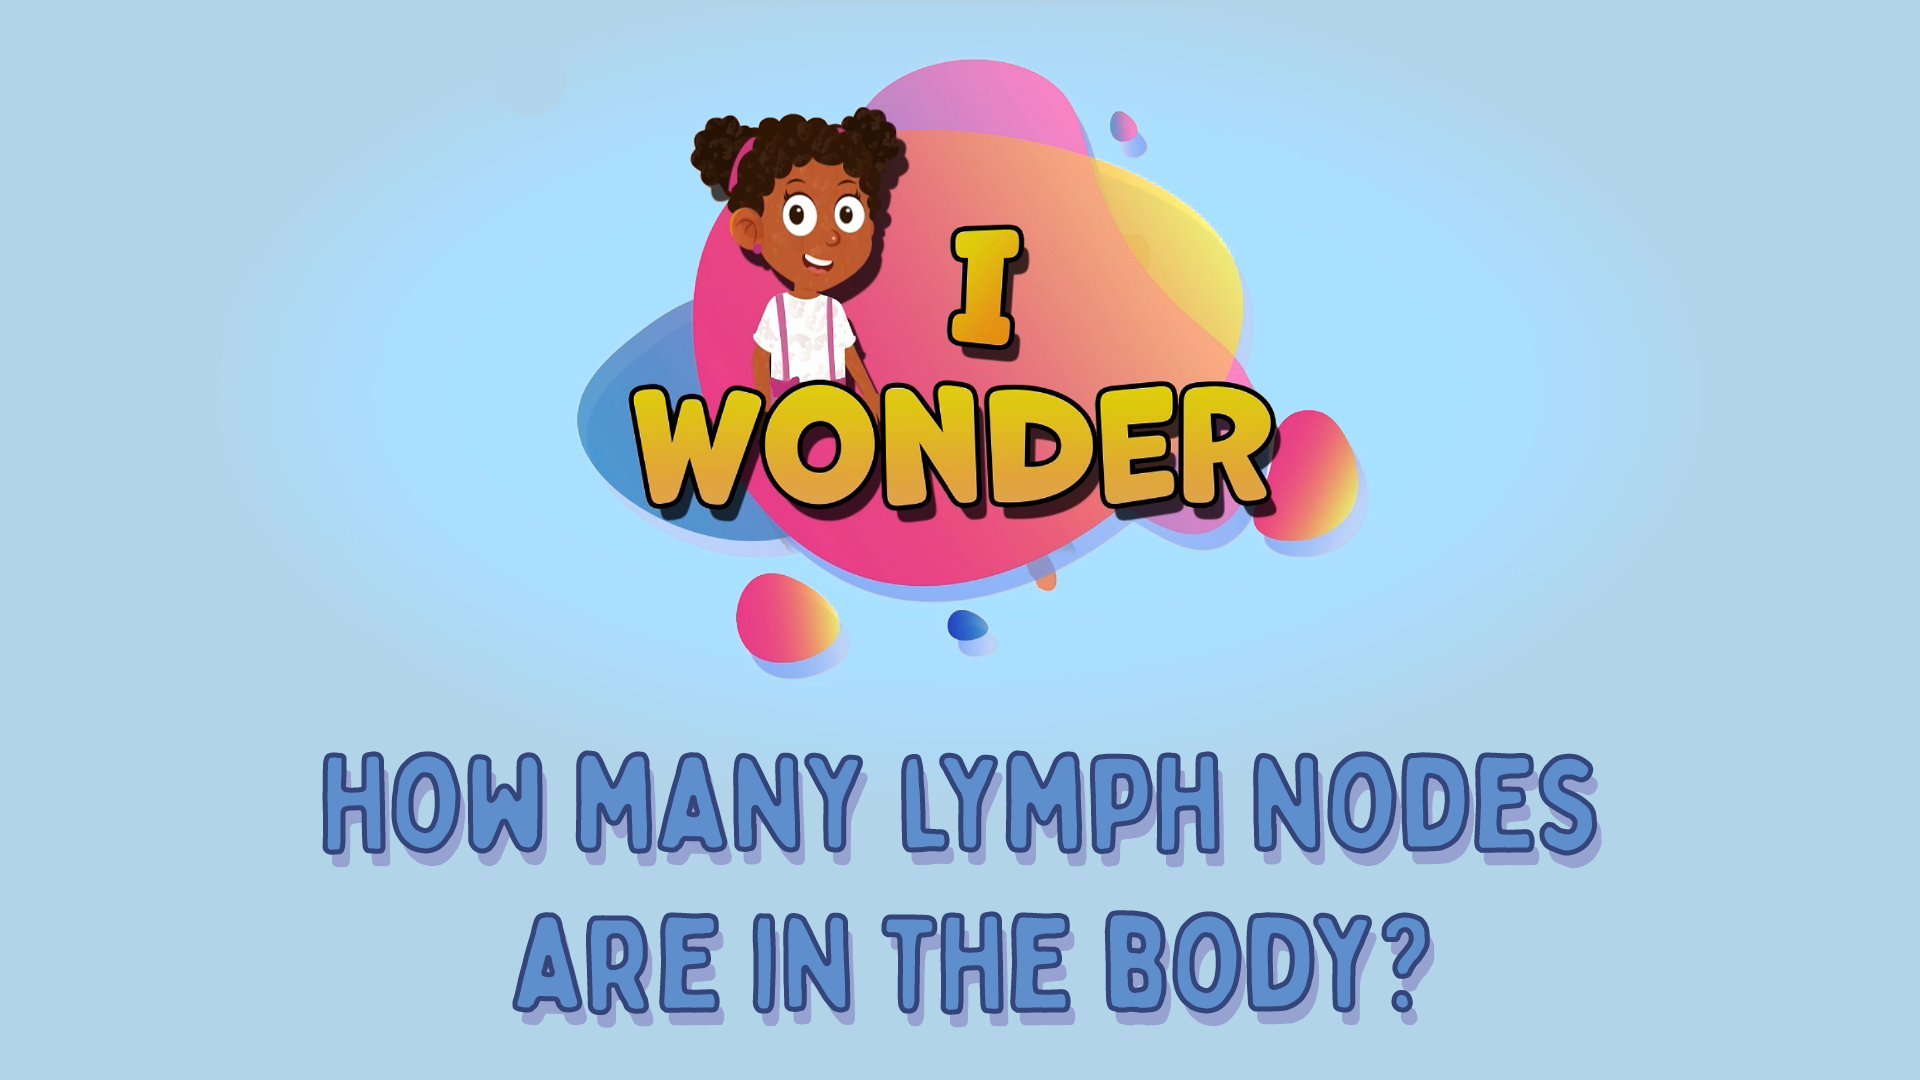 How Many Lymph Nodes Are In The Body?